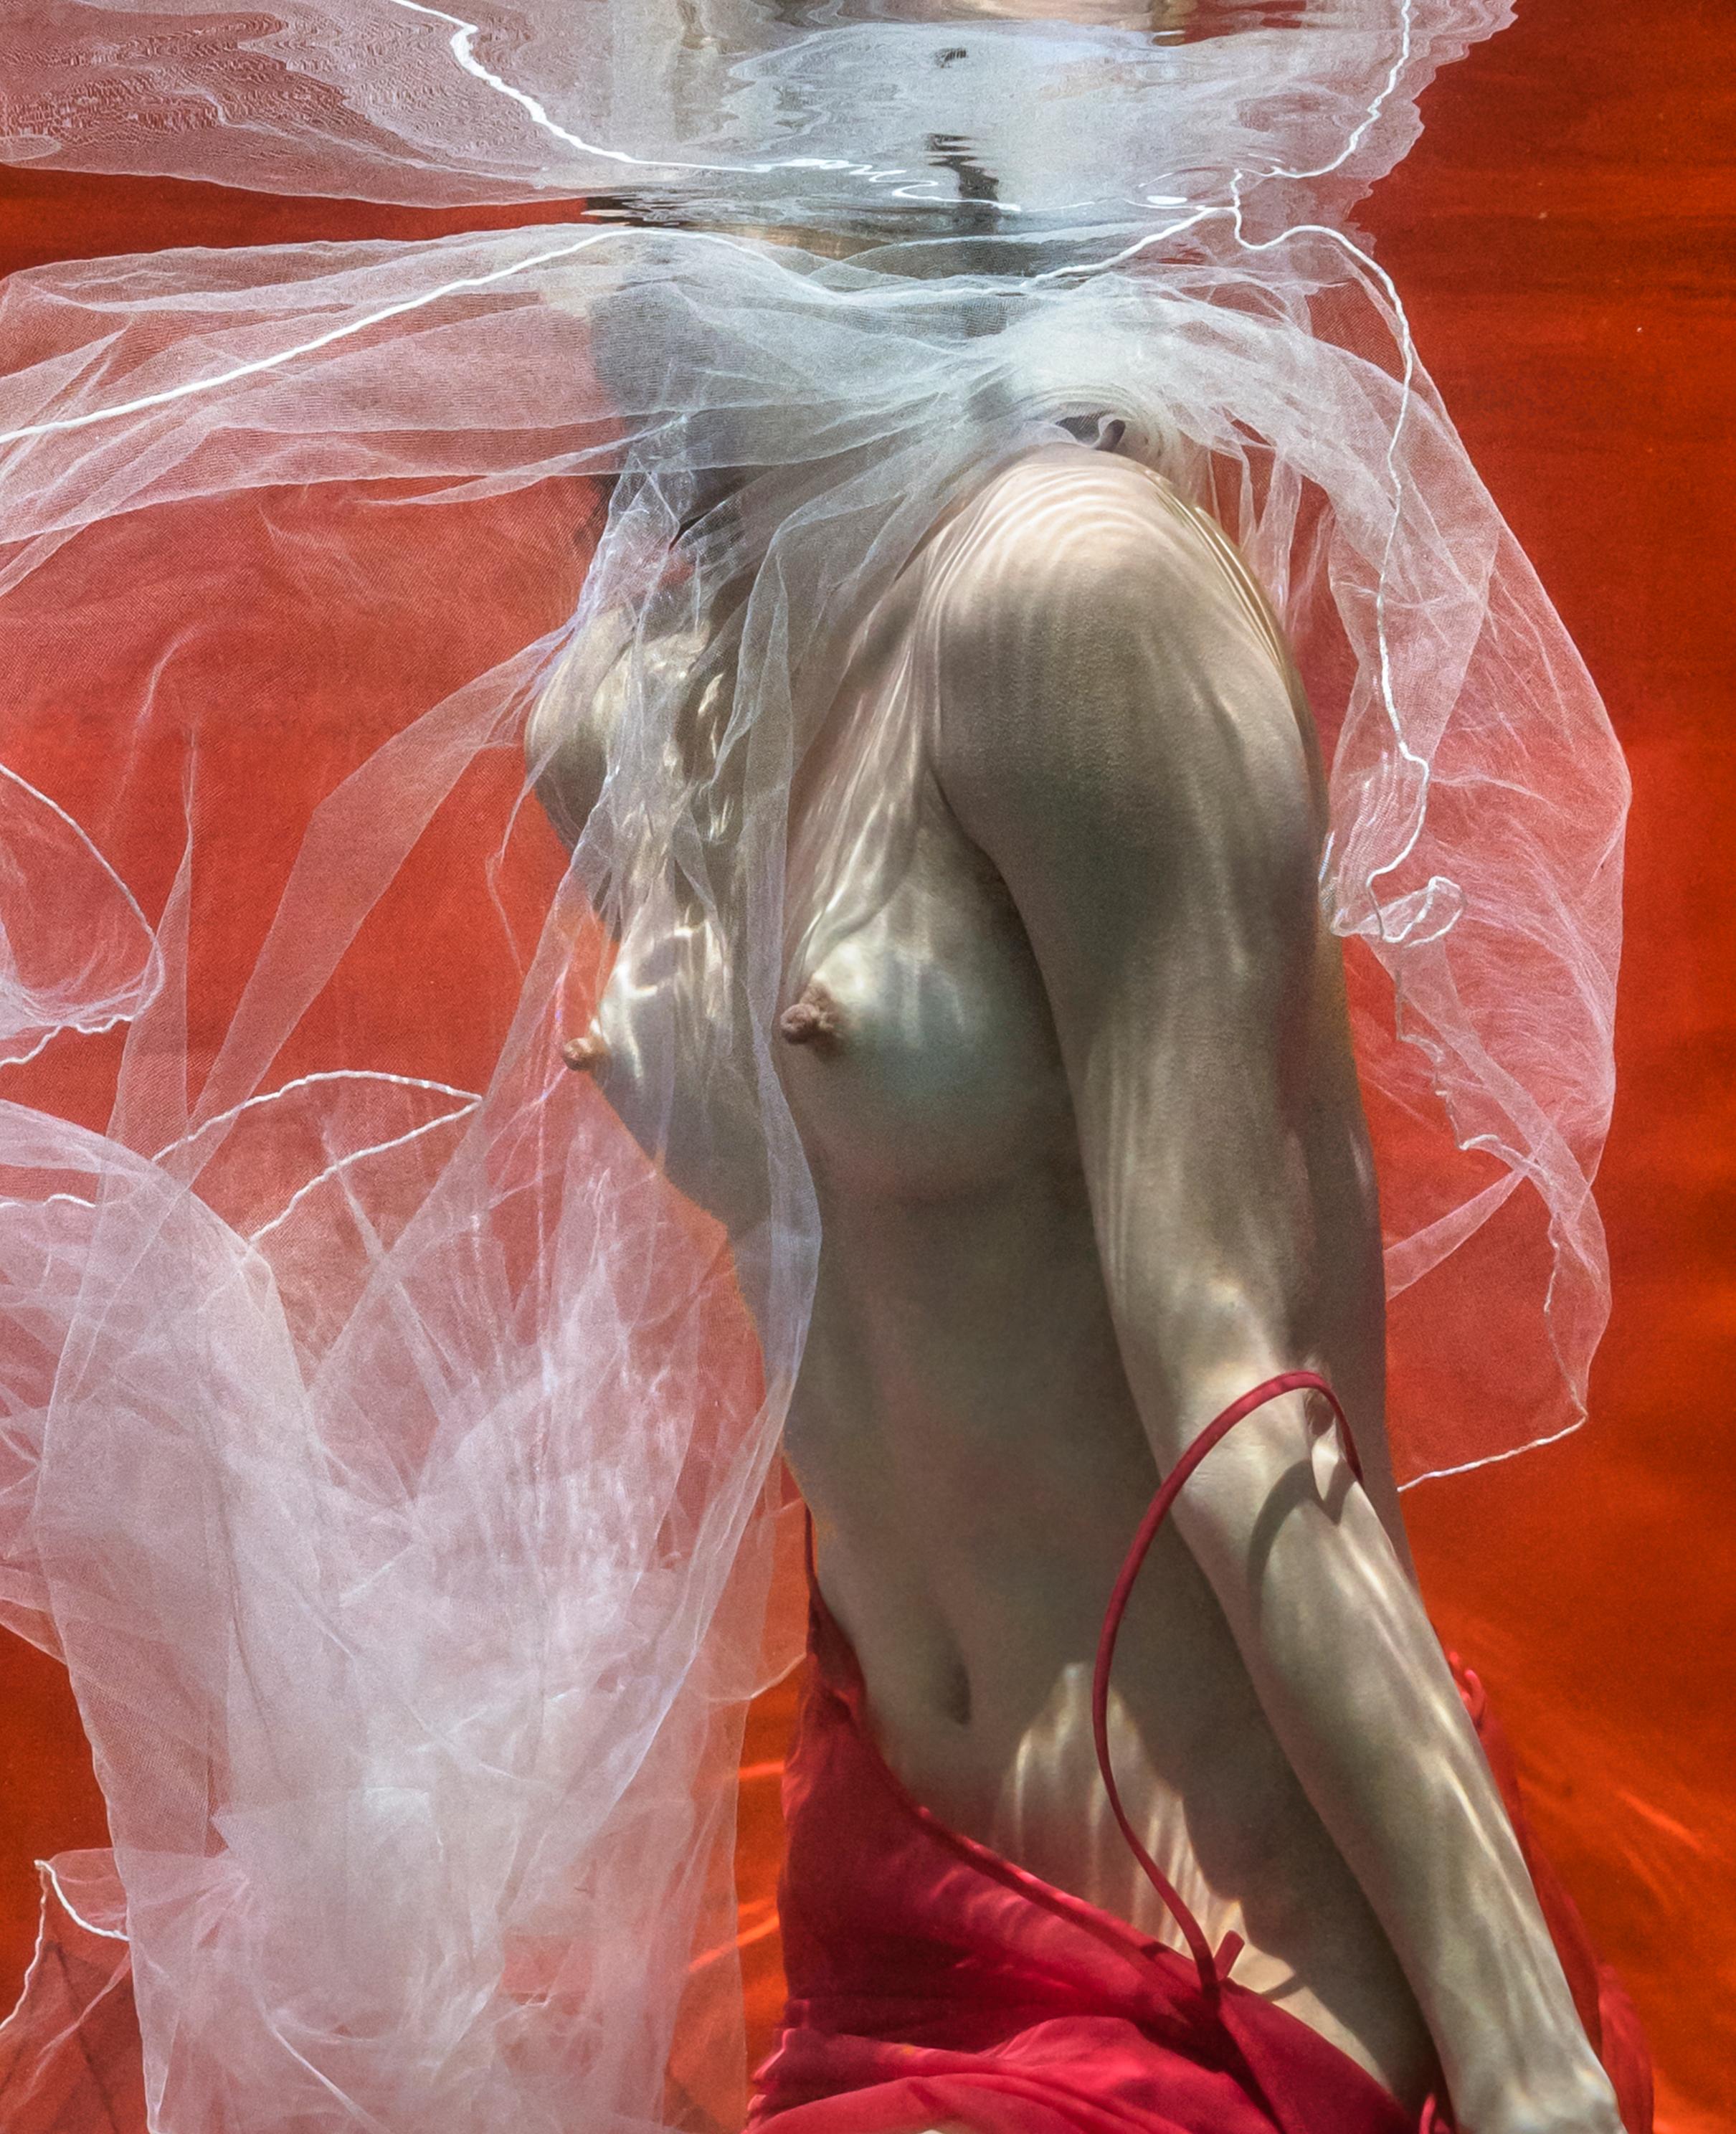 An underwater photograph of a topless young woman with white tulle scarf taking off her red skirt on bright red background. 

Original digital print on archival paper signed by the artist.
Limited edition of 24 print 2
Paper size: 62x44